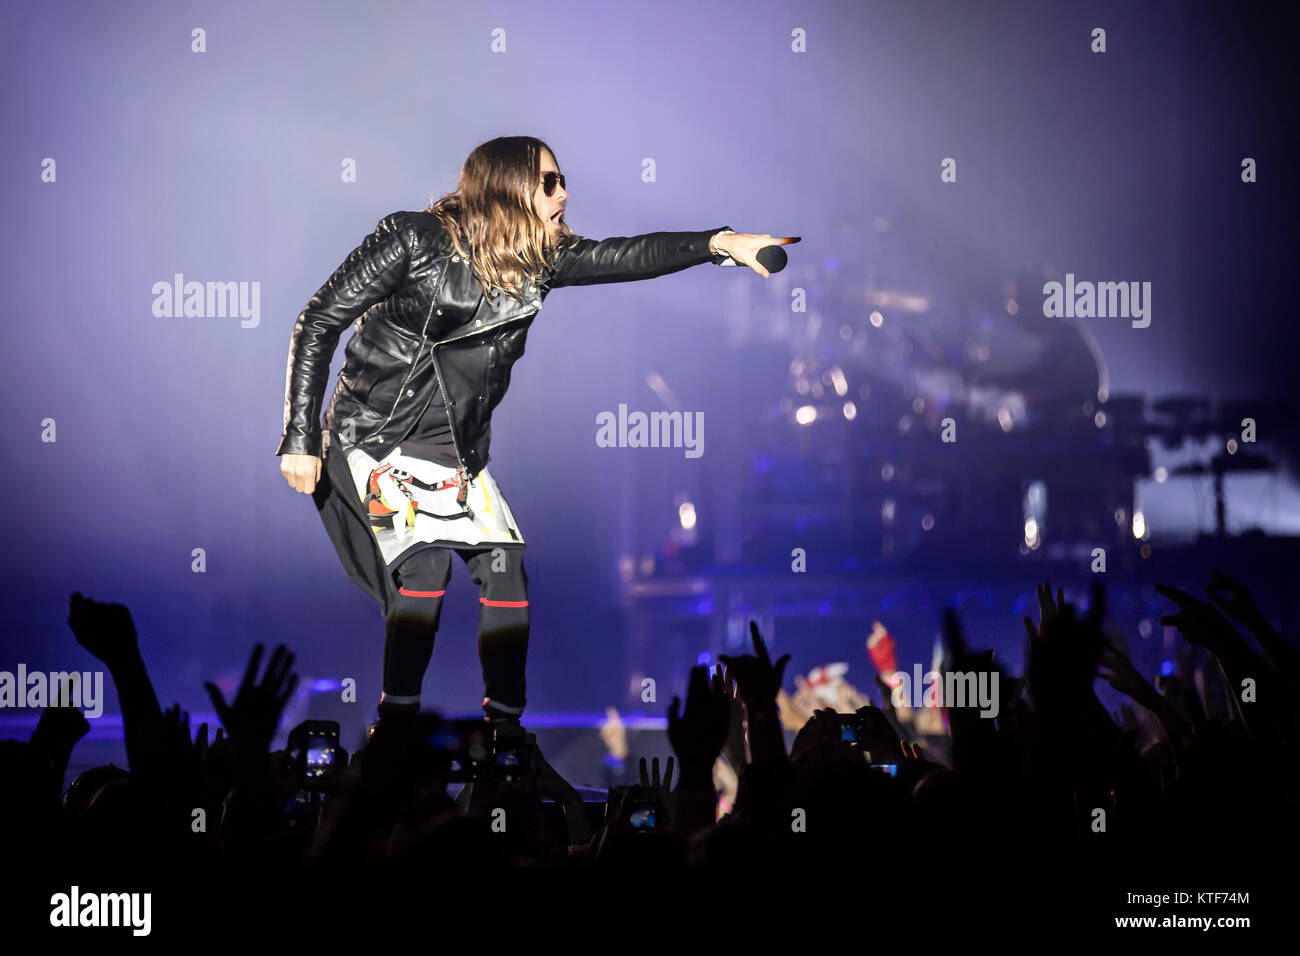 30 Seconds To Mars, the American rock band, performs a live concert at Spektrum in Oslo. Here singer, songwriter and actor Jared Leto is seen live on stage. Norway, 23/02 2014. Stock Photo